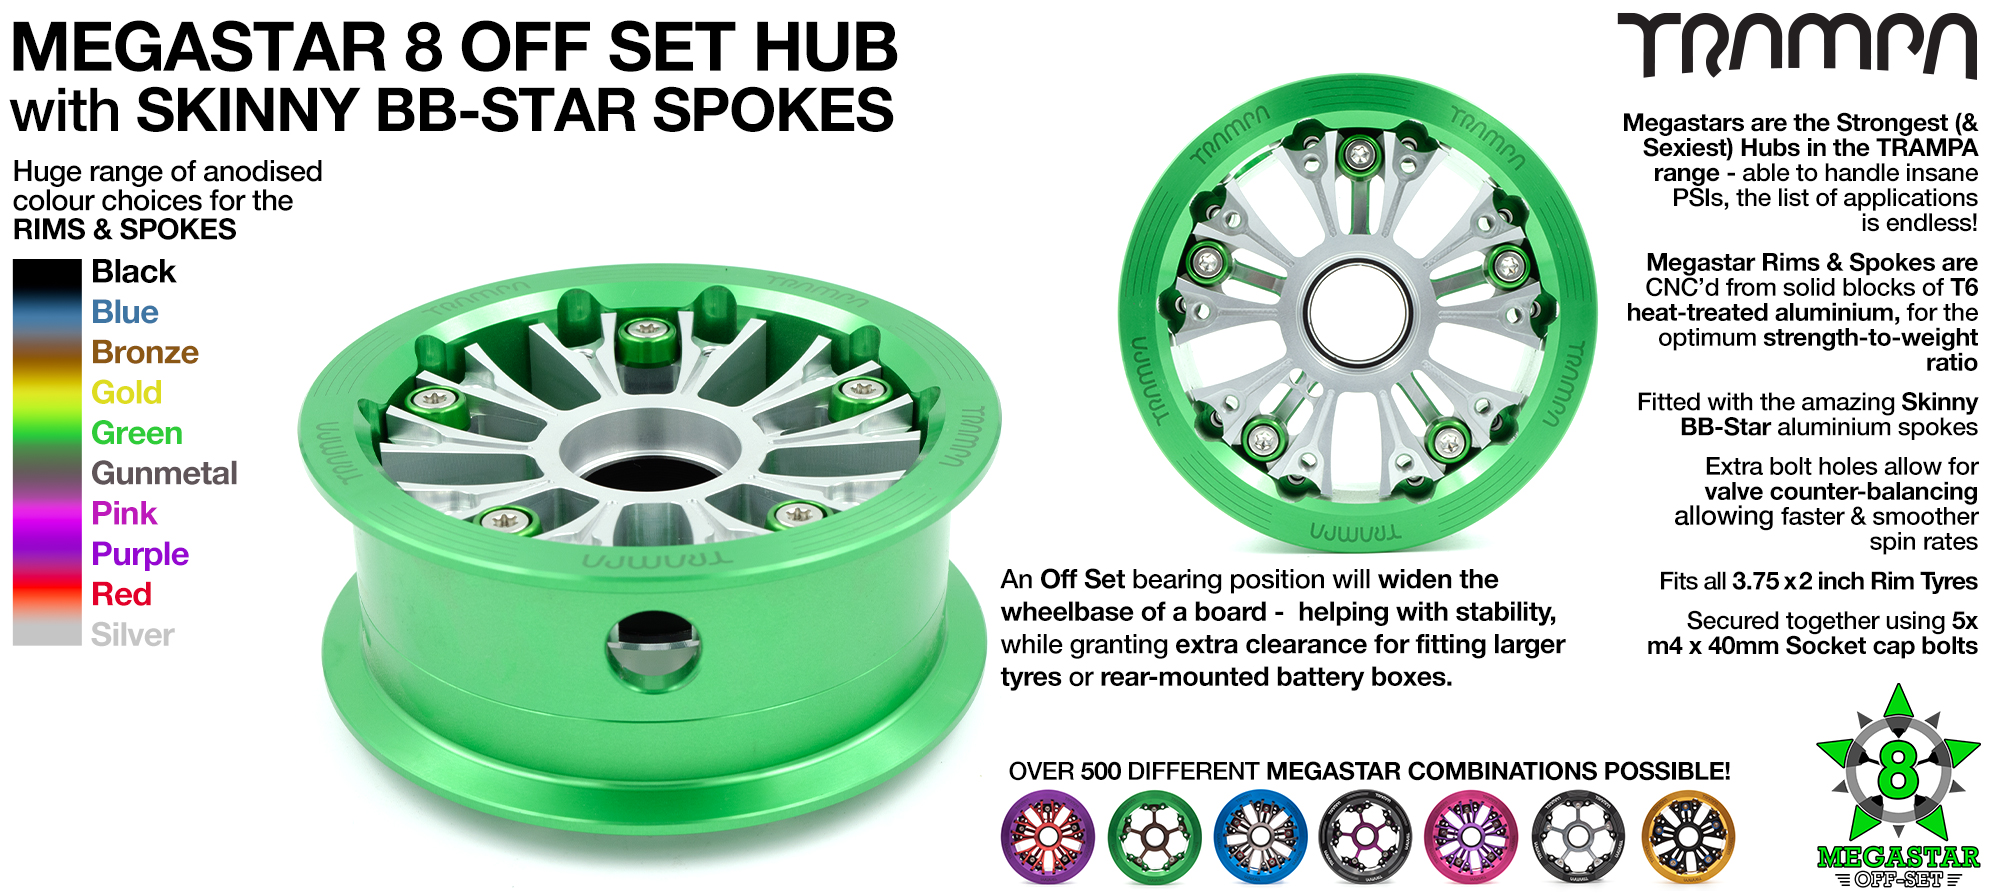 OFF-SET MEGASTAR 8 Hub with CLASSIC Spokes 3.75 x 2 Inch - Fits all TRAMPA Tyres up to 8 Inch